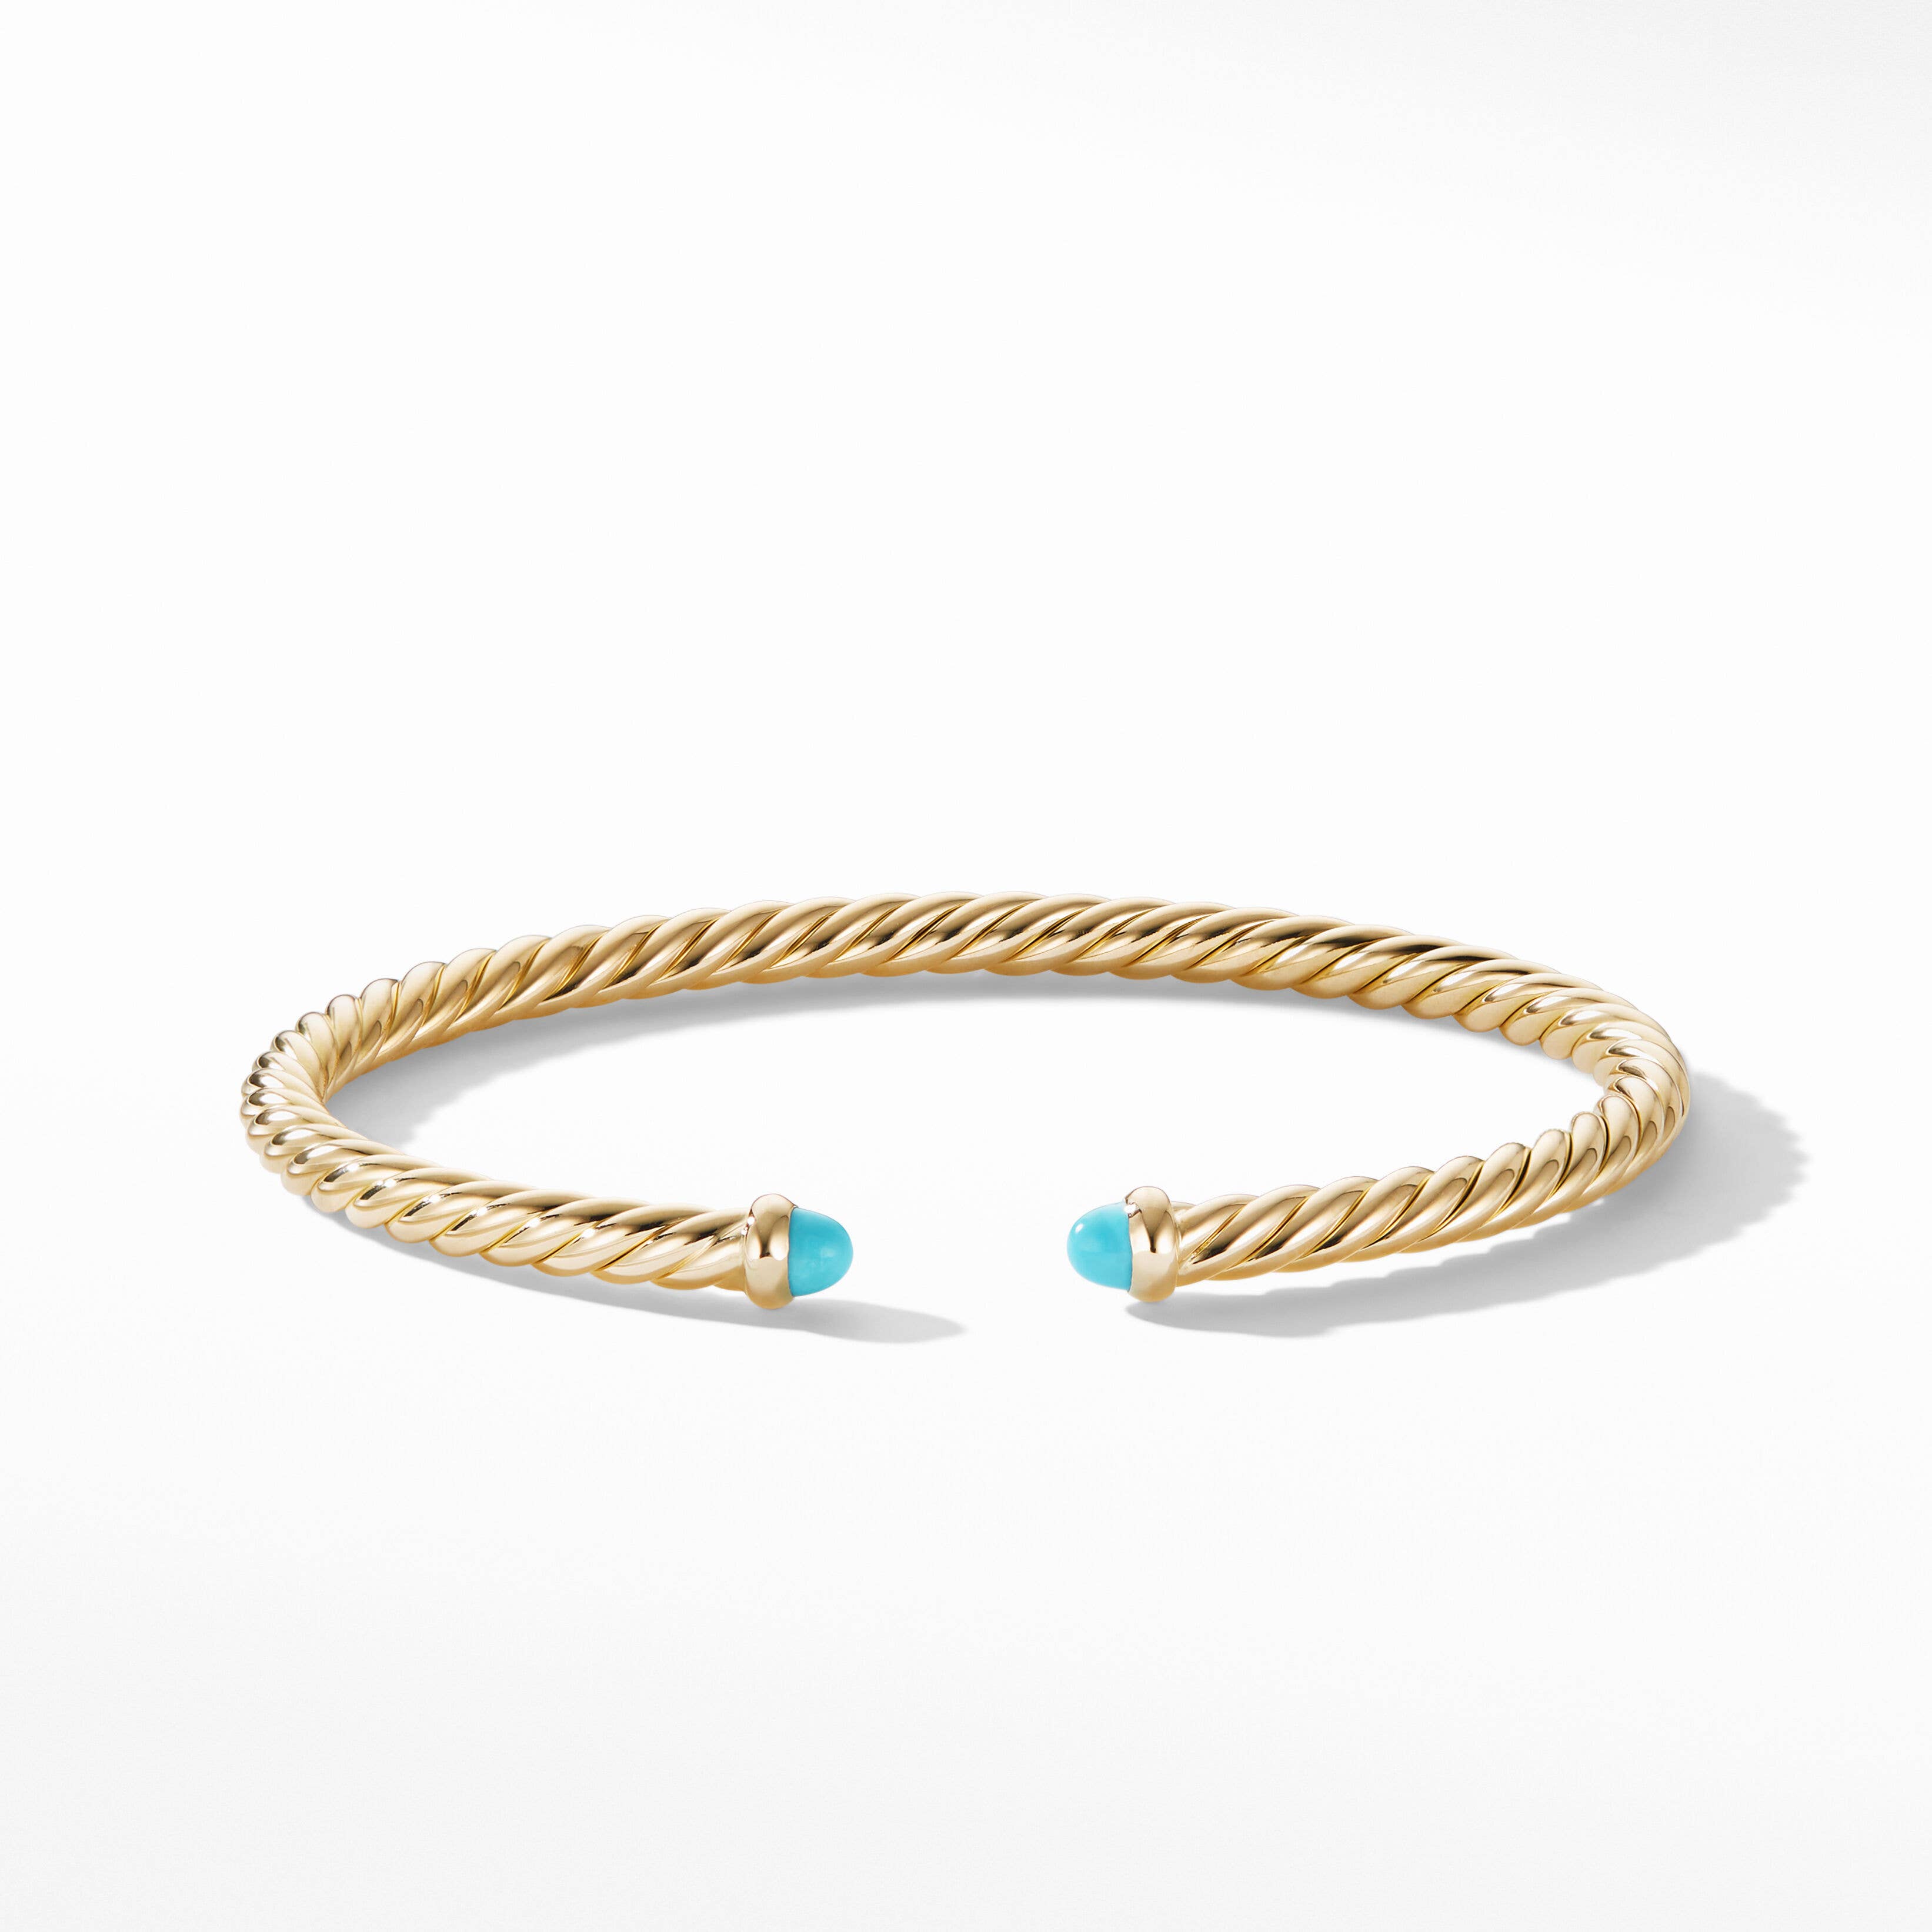 Cablespira® Bracelet in 18K Yellow Gold with Turquoise